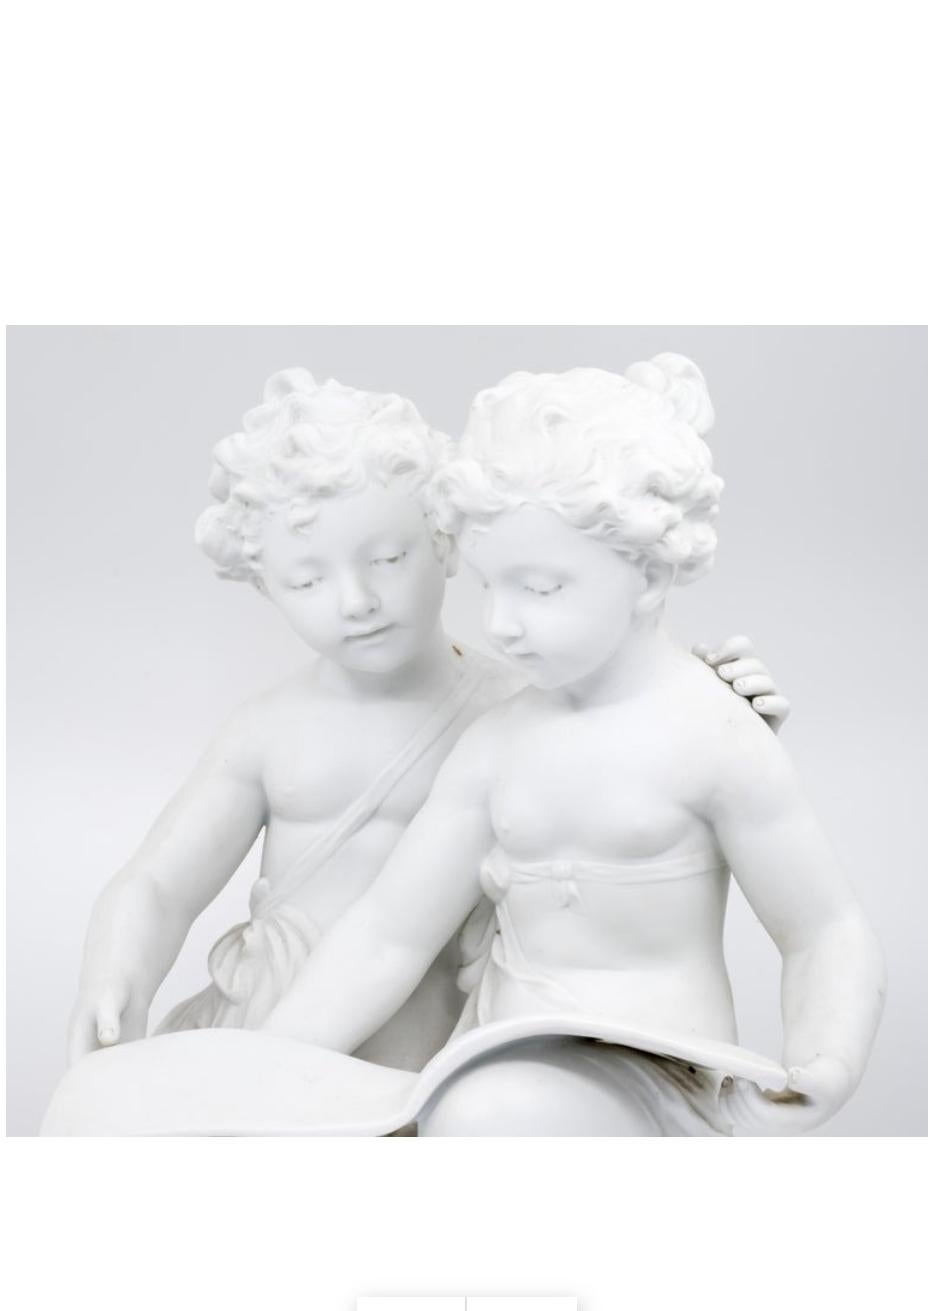 Carrara Marble Bisque Porcelain a Stature of Boy and Girl Reading a Book, French, 19th Century For Sale